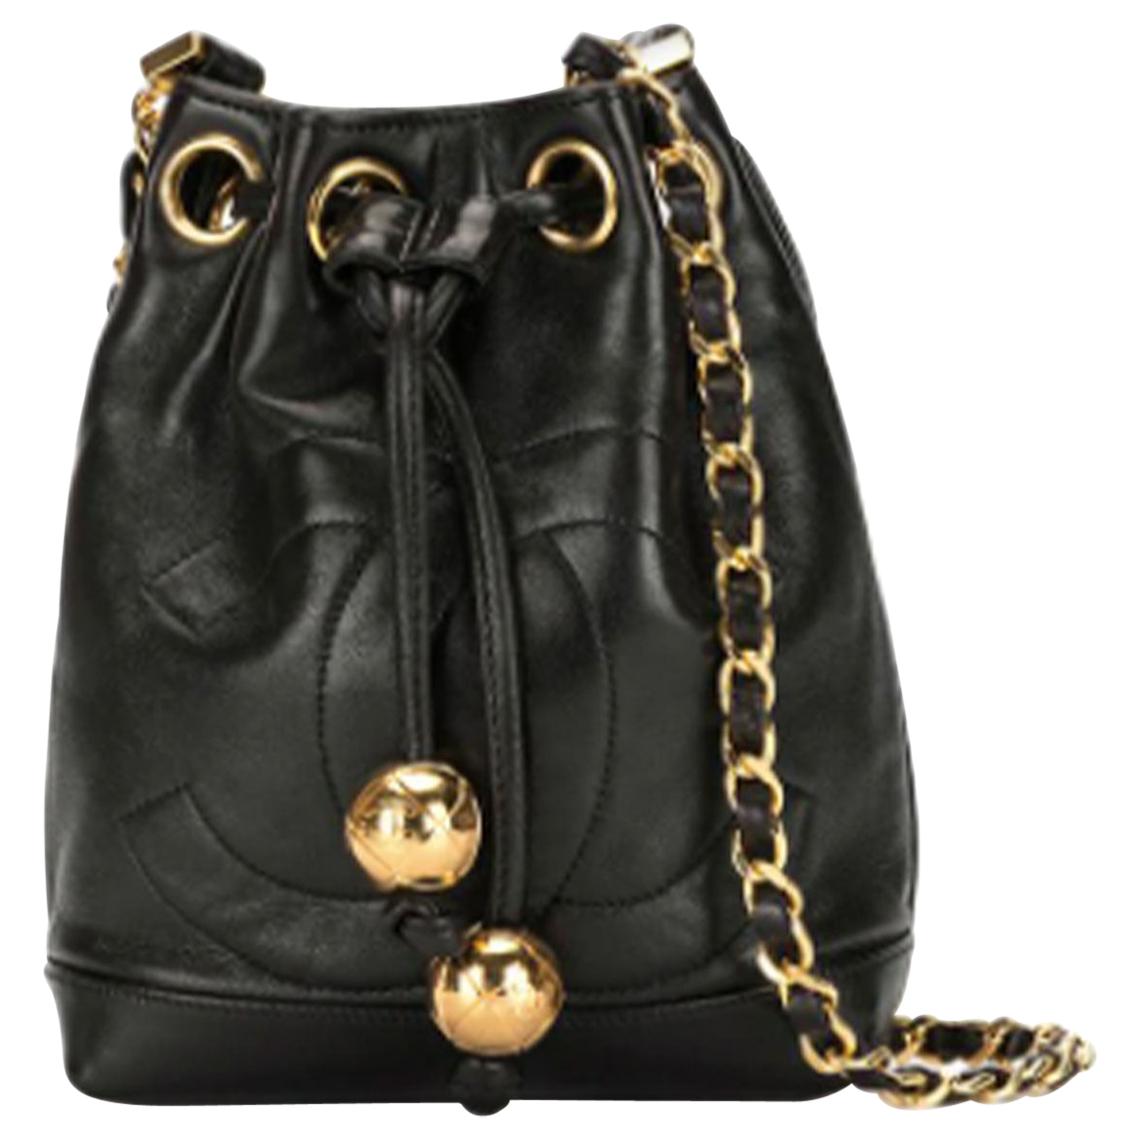 Chanel Rolled Up Drawstring Bucket Bag in Black Caviar with Gold Hardware   SOLD